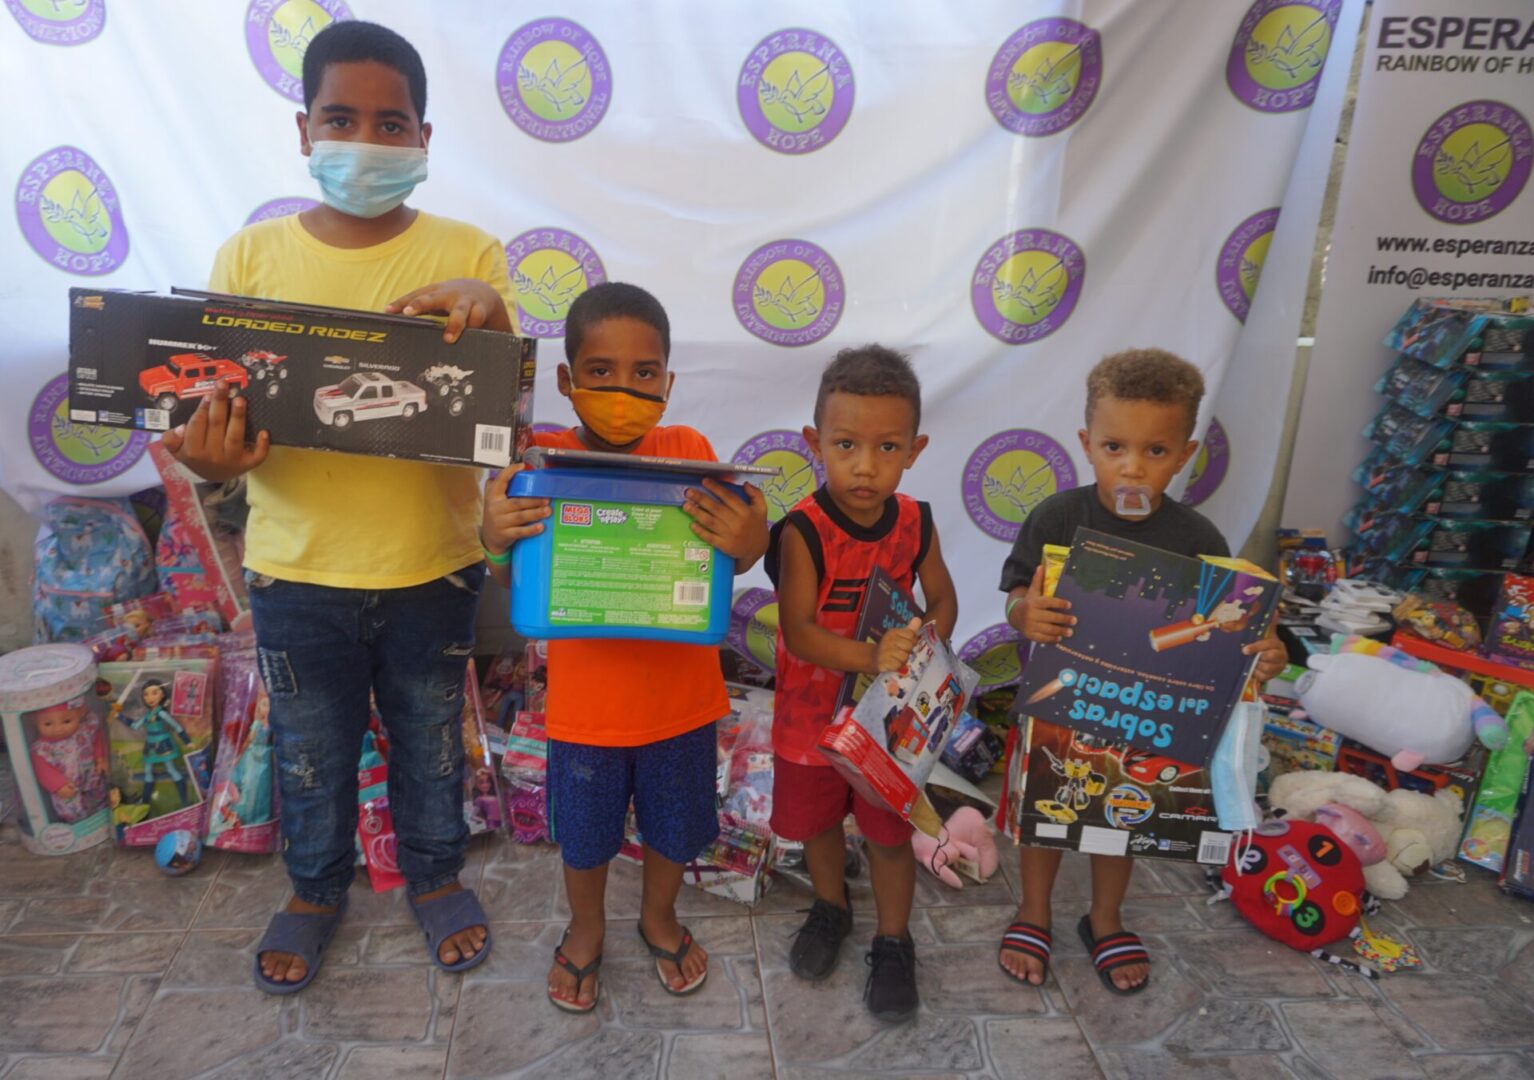 Four boys standing against the Esperanza-Hope backdrop with their toys and books, batch 3